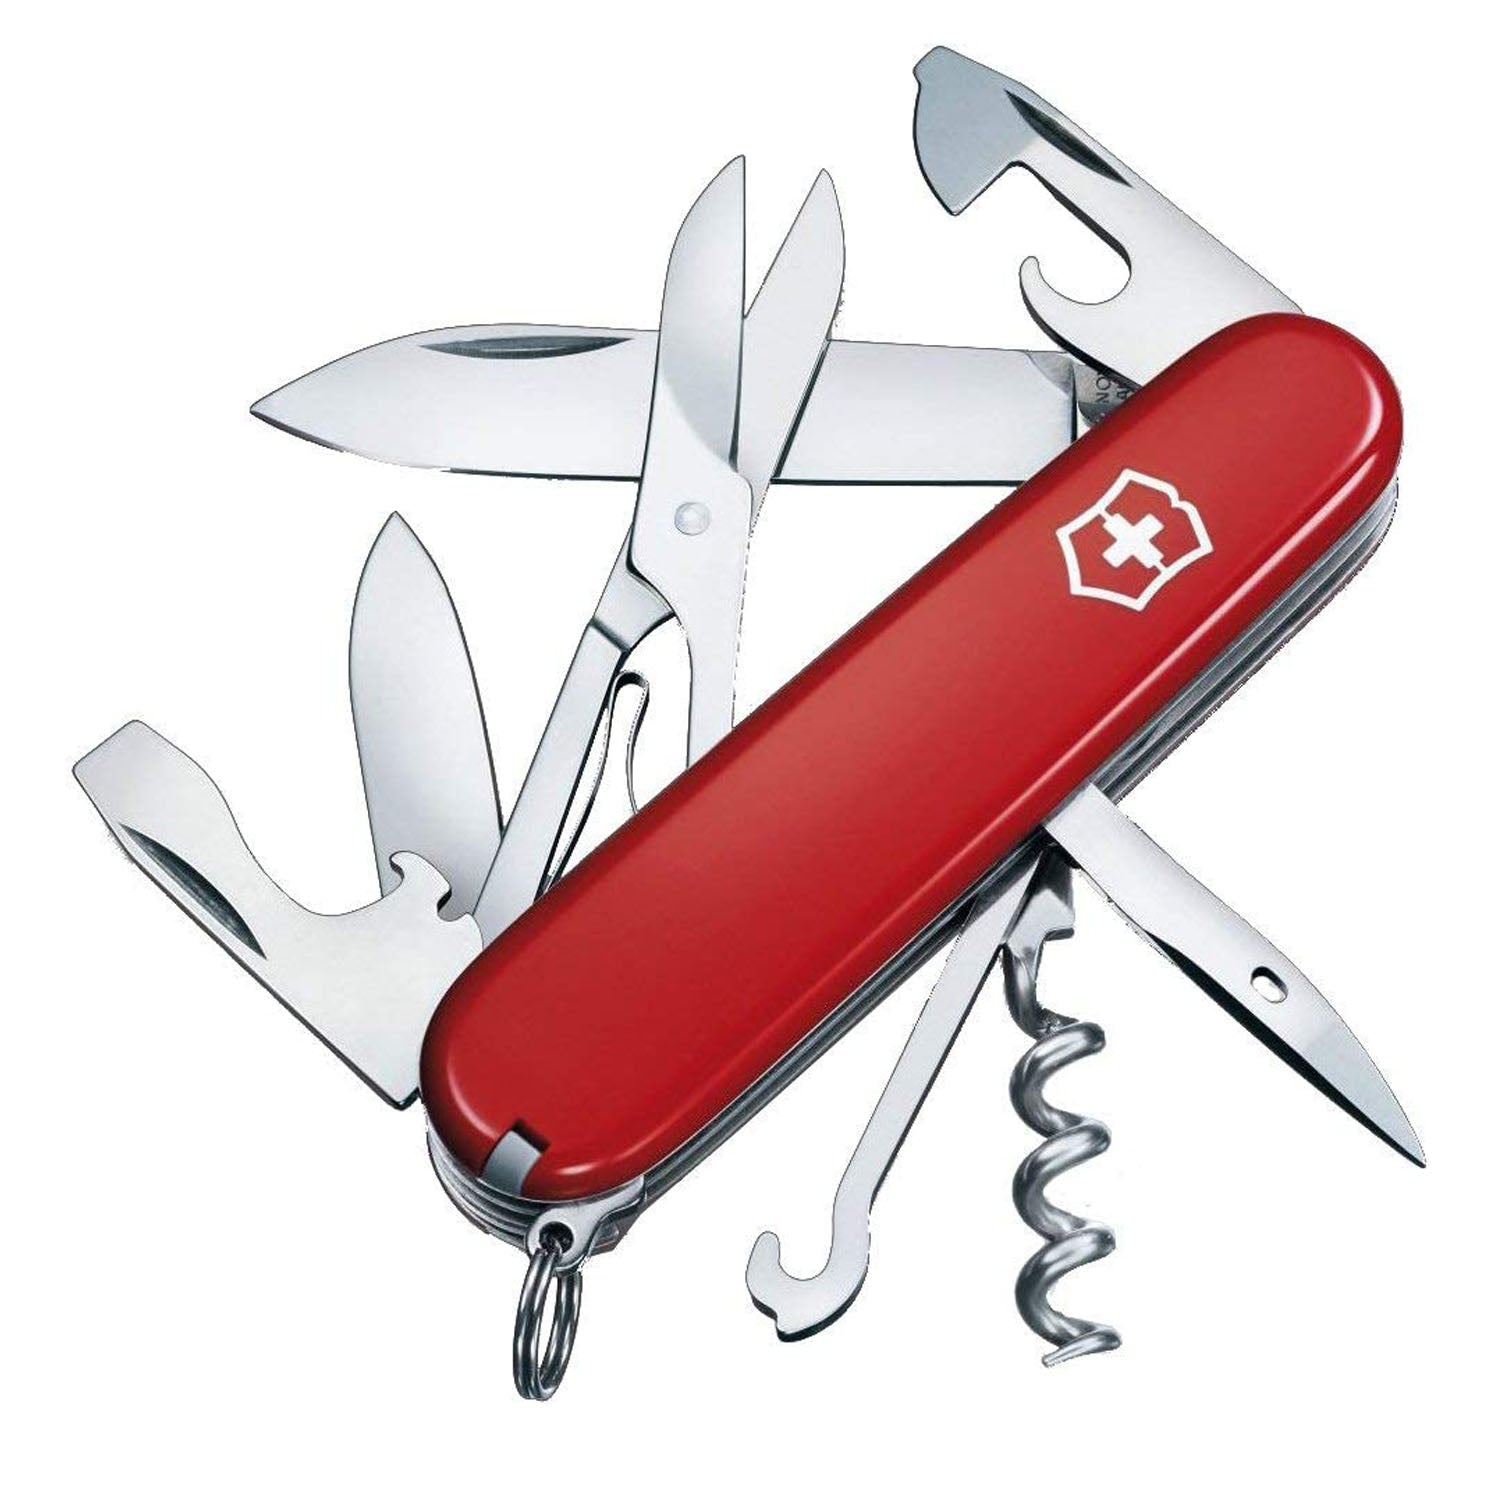 Victorinox Swiss Classic 7 Chinese Cleaver, Red TPE Handle